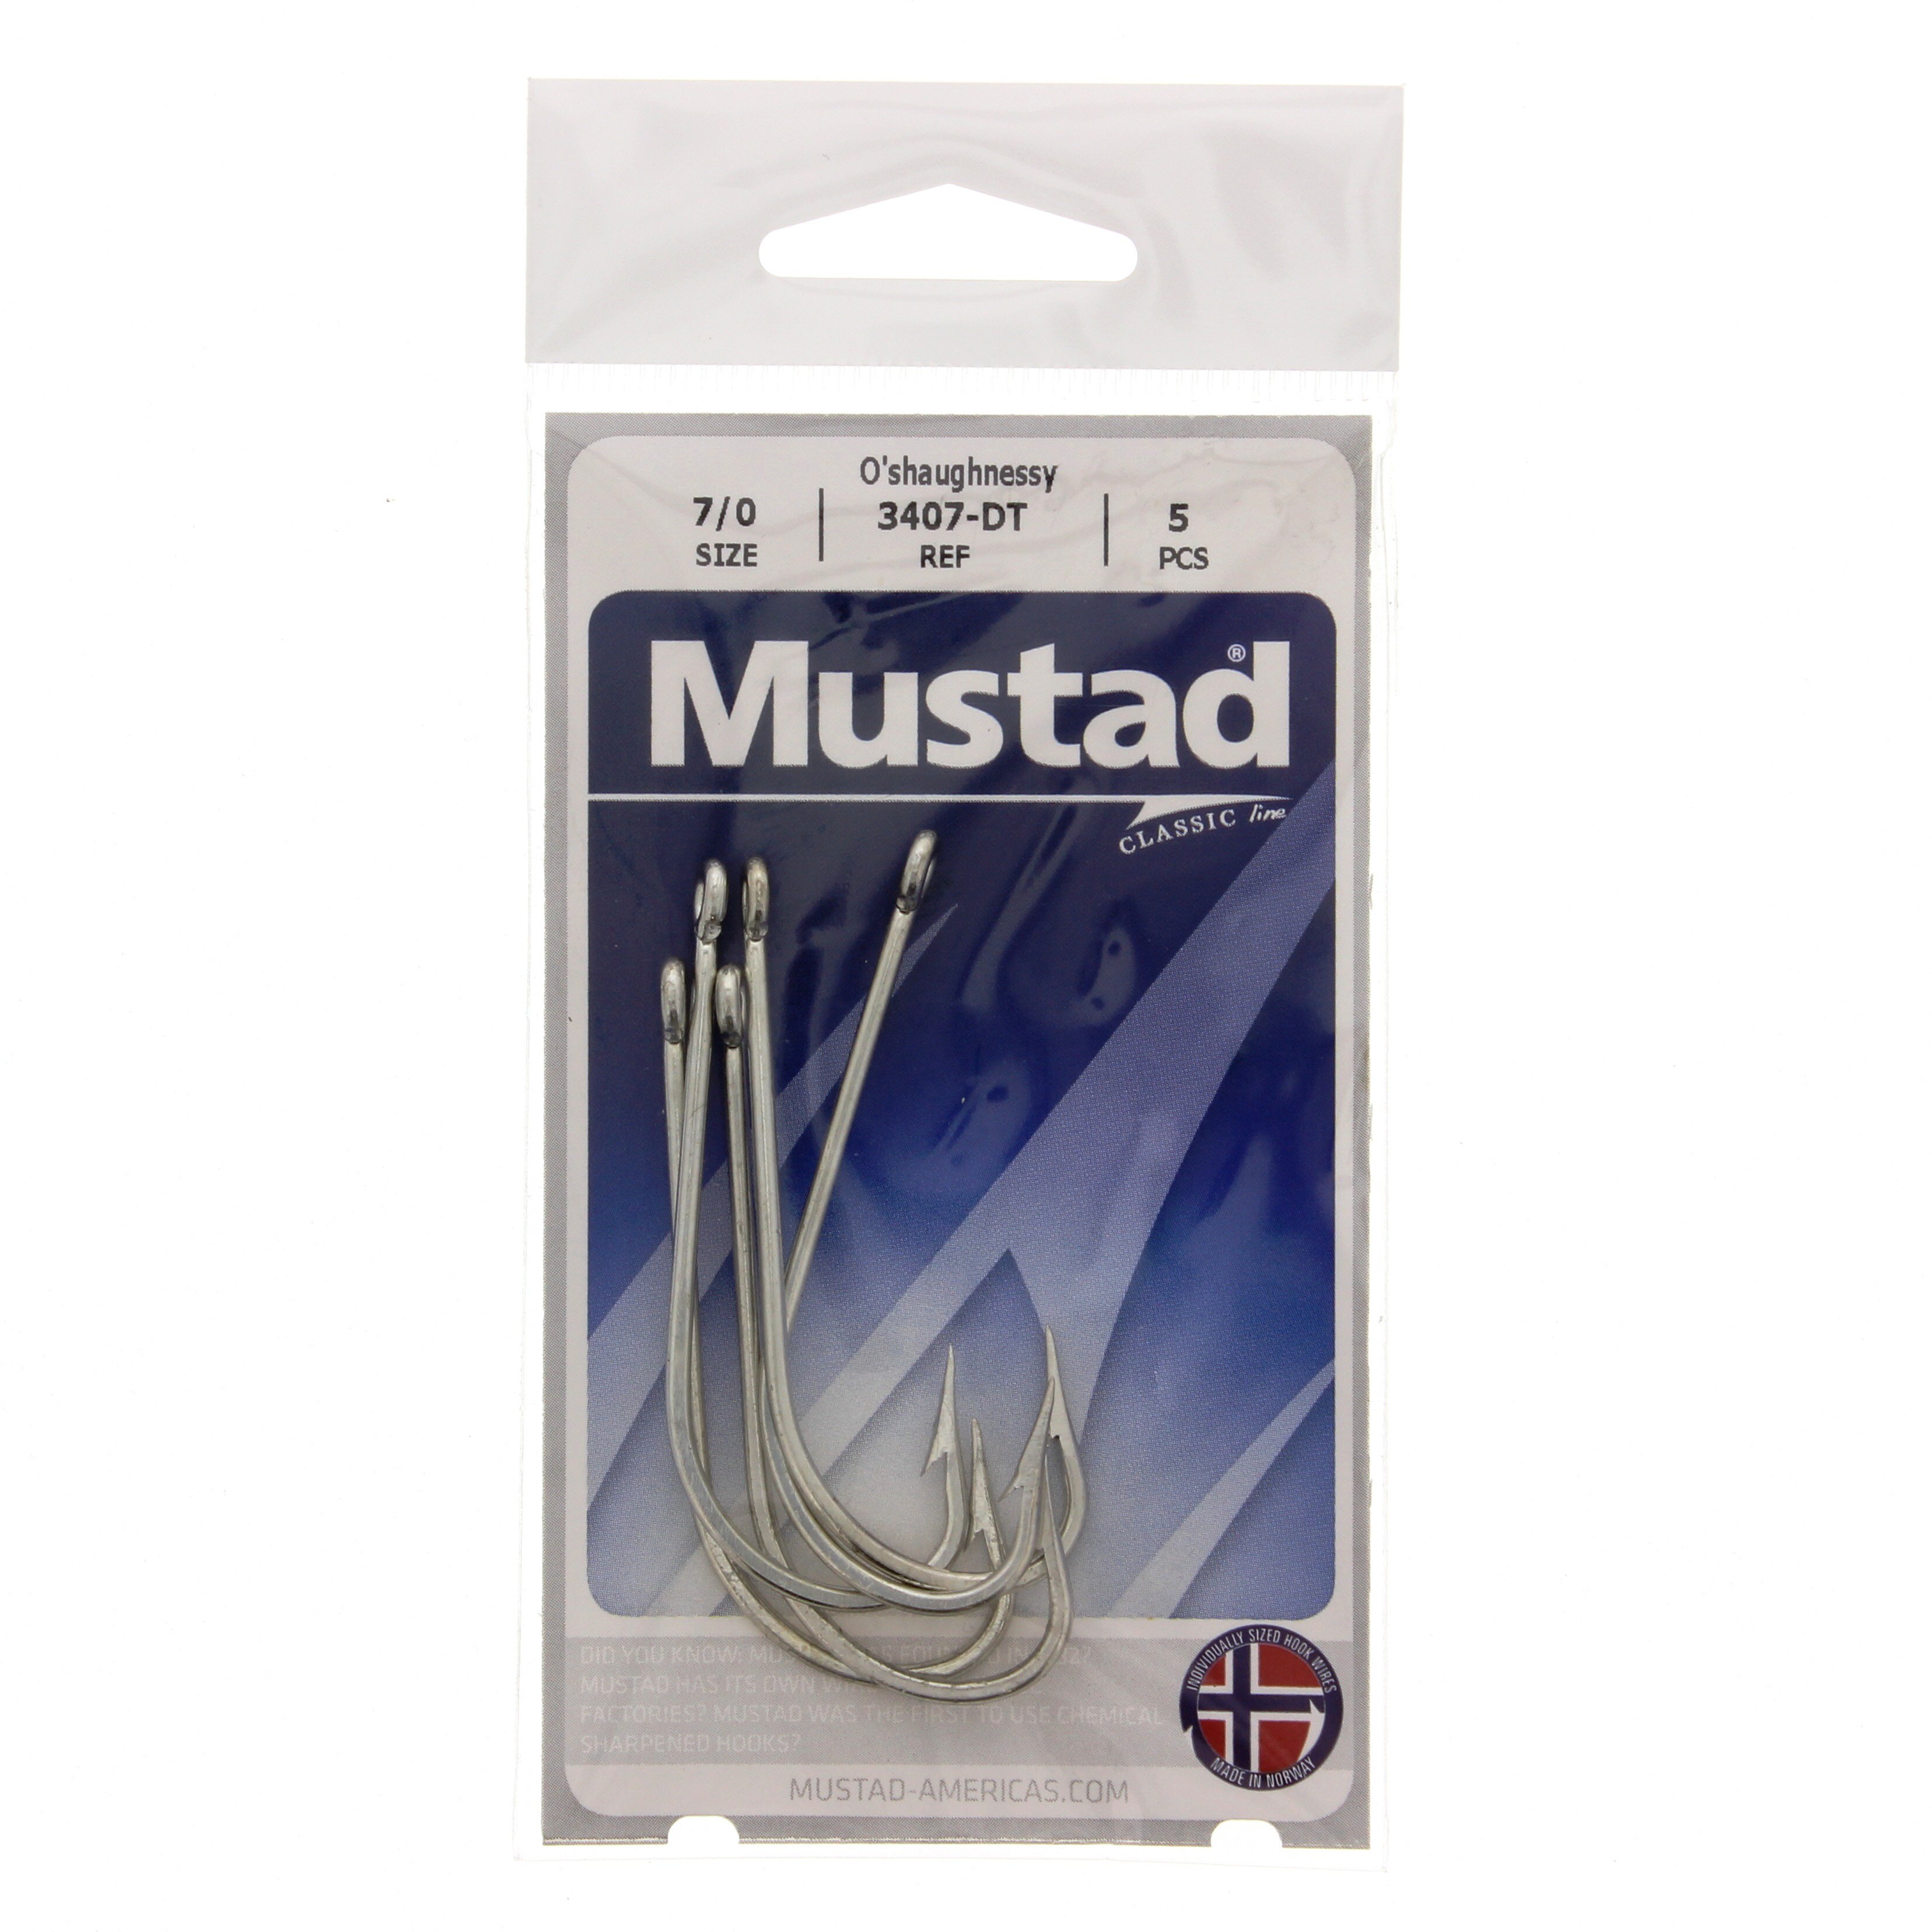 Mustad O'shaughnessy 3407-DT Hooks Size 7/0 - Shop Fishing at H-E-B